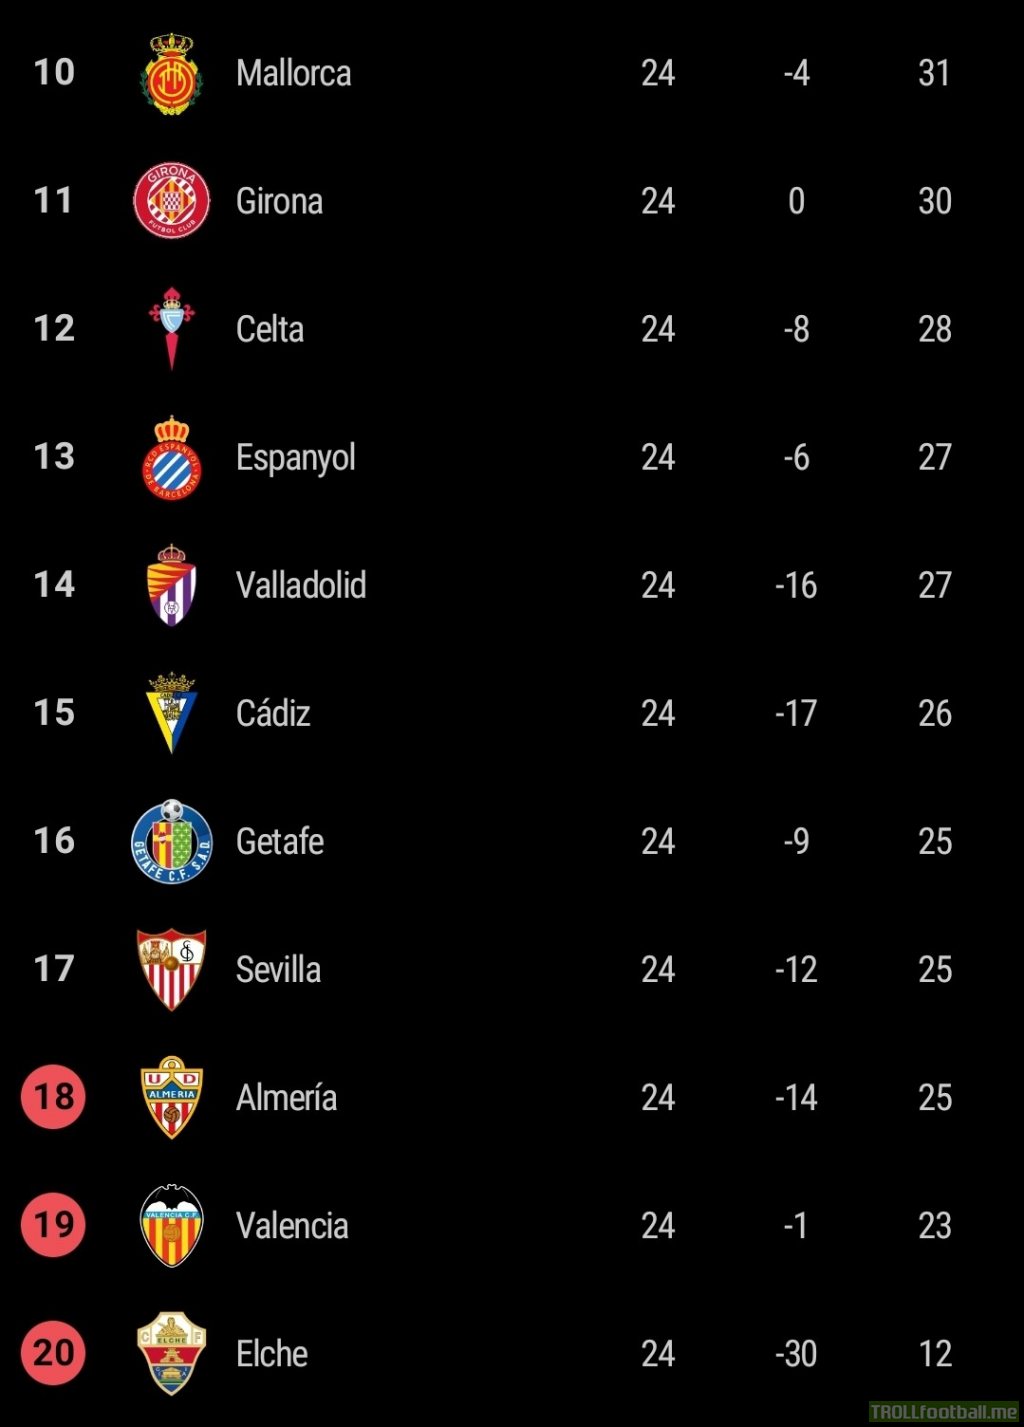 Laliga relegation battle: only 6 points separates Almeria [18th] and Mallorca [10th]